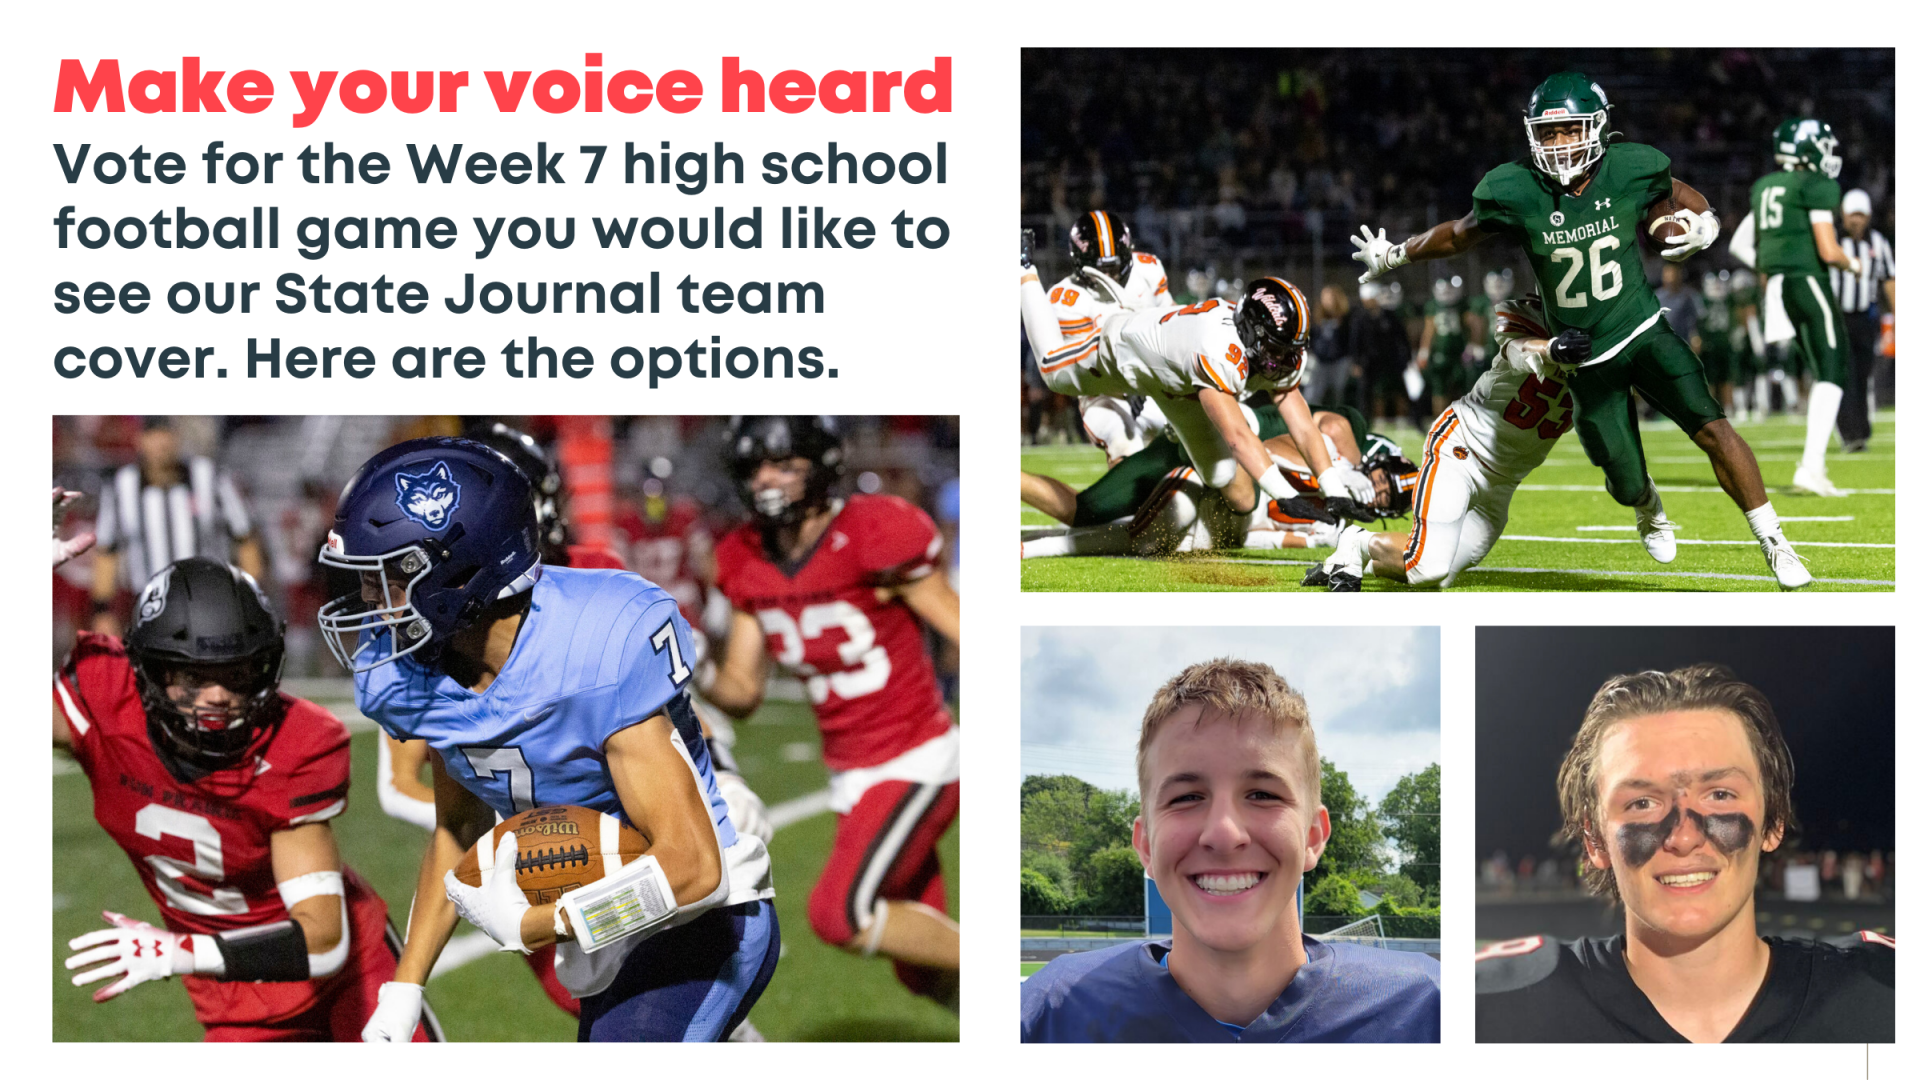 Vote for the High School Football Game to Cover in Week 7 in Madison Area